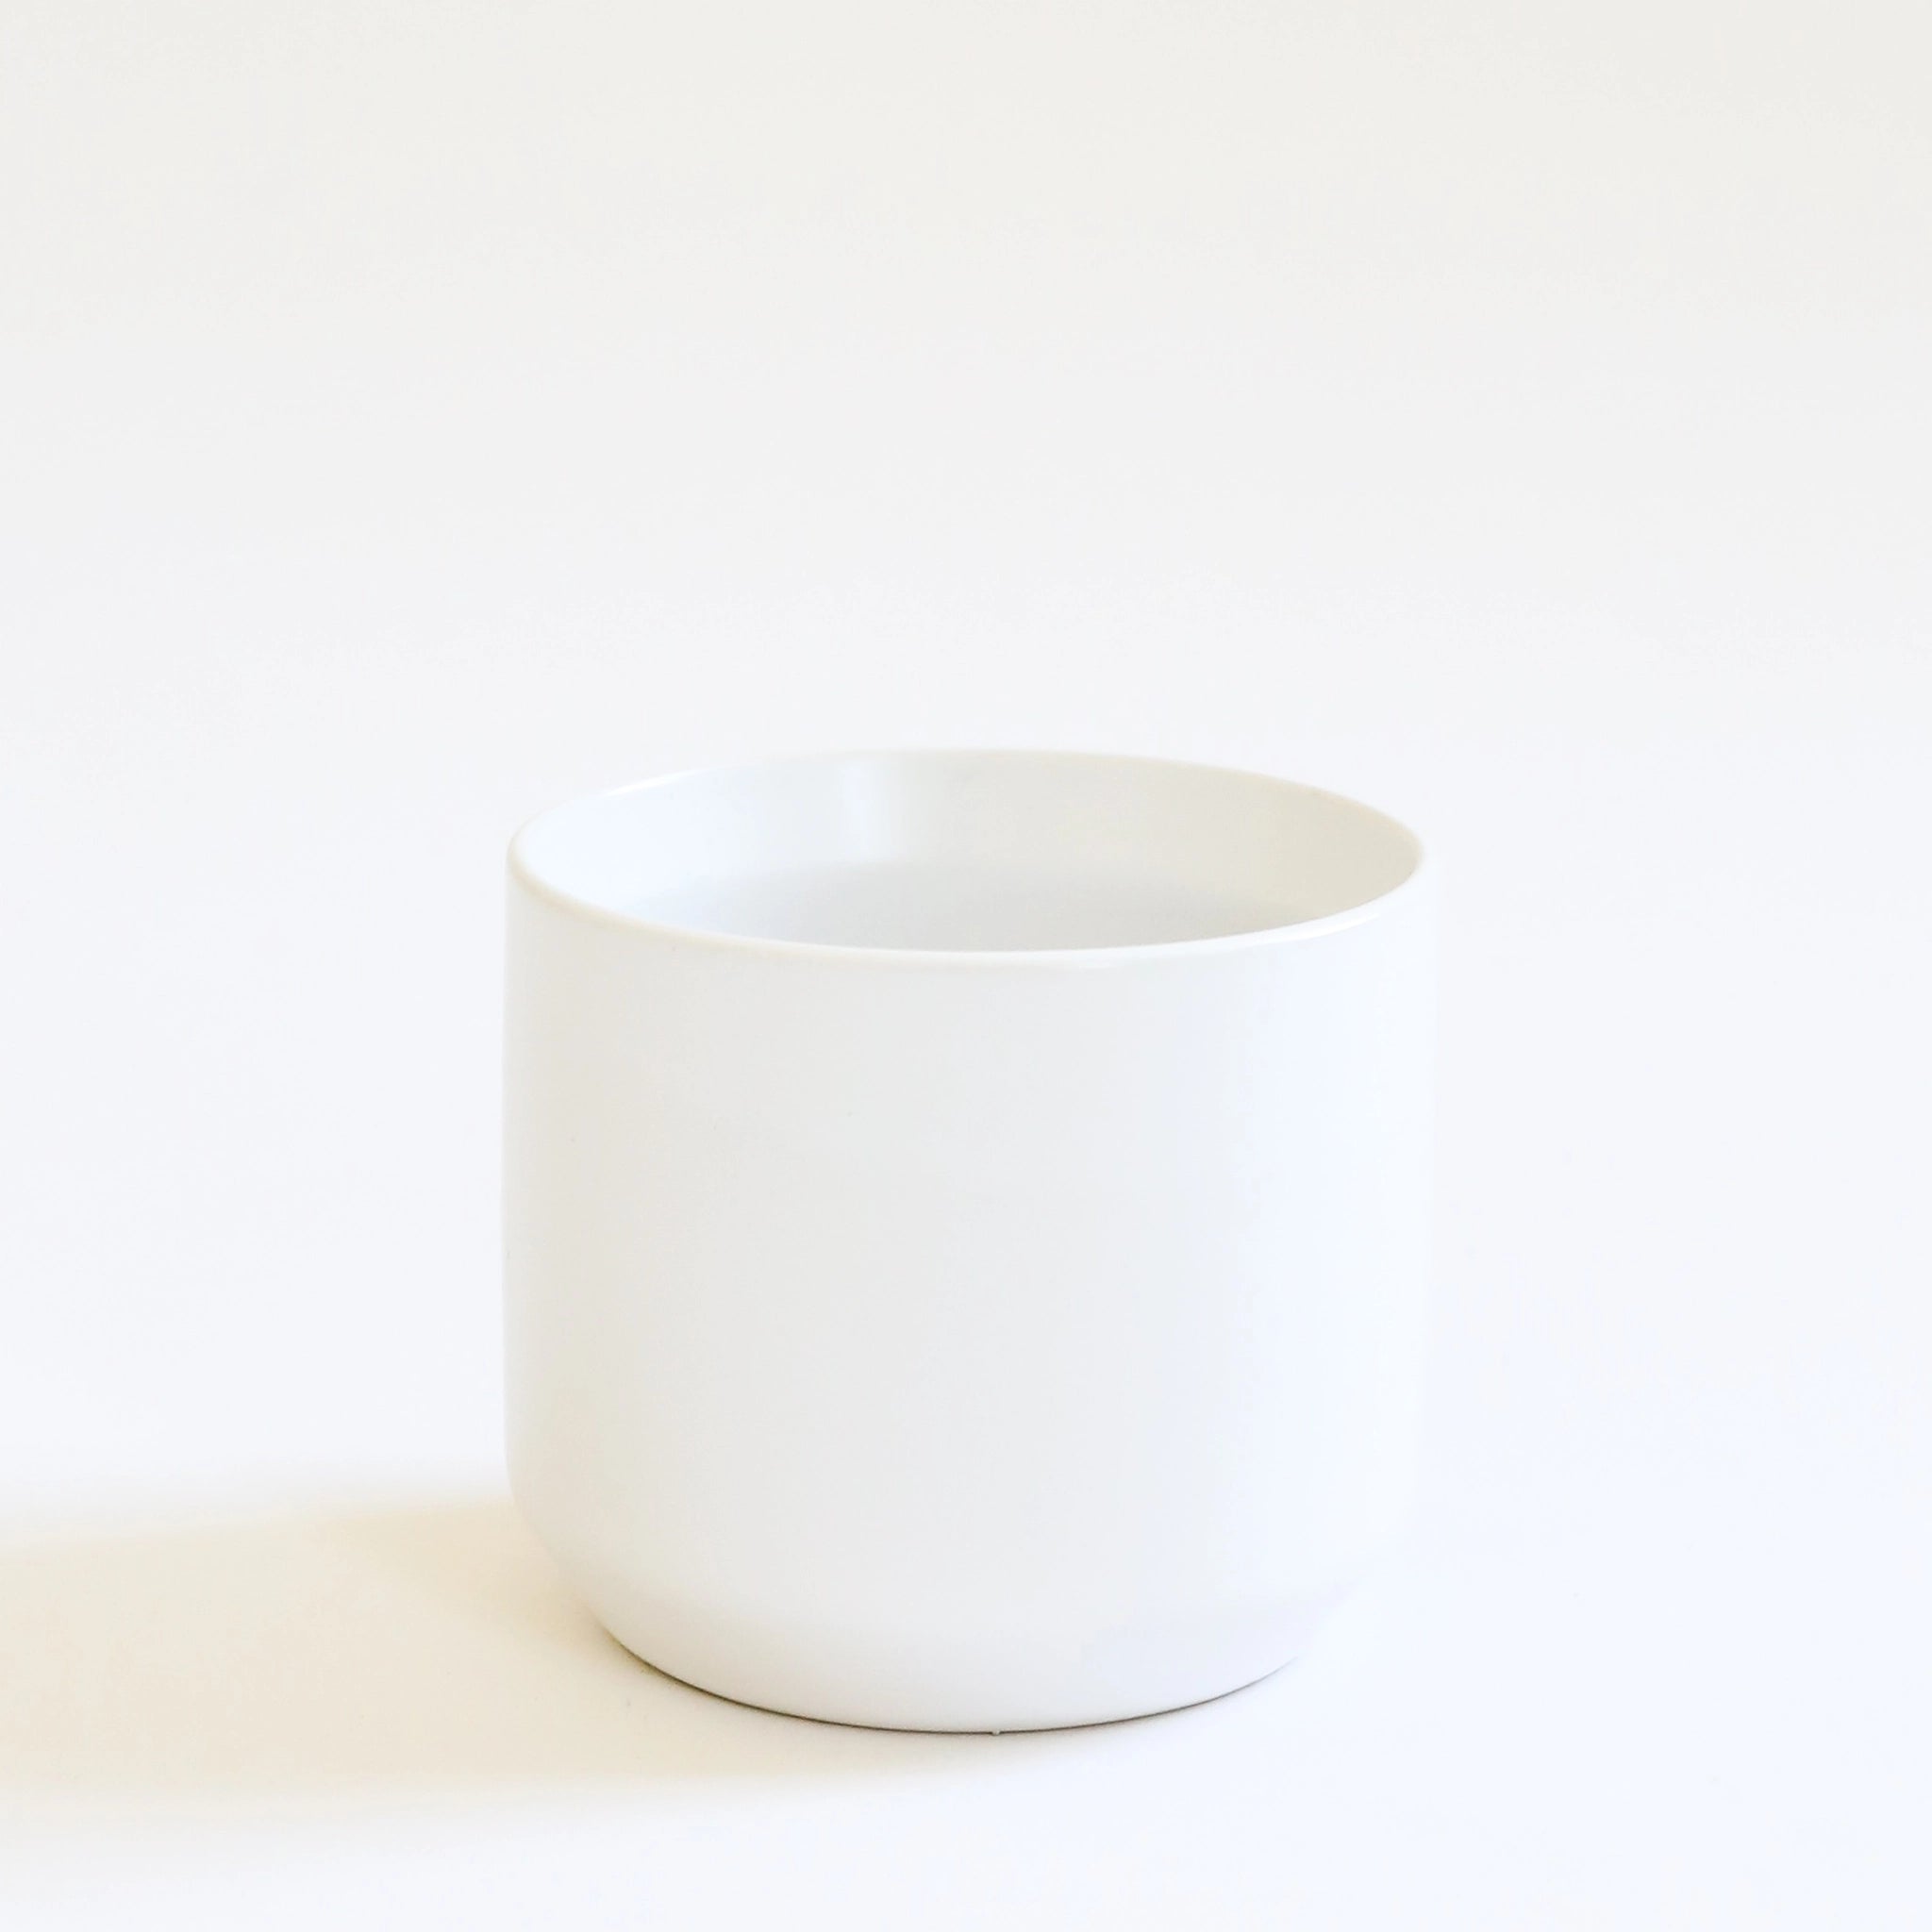 empty simple white pot sits on a white ground